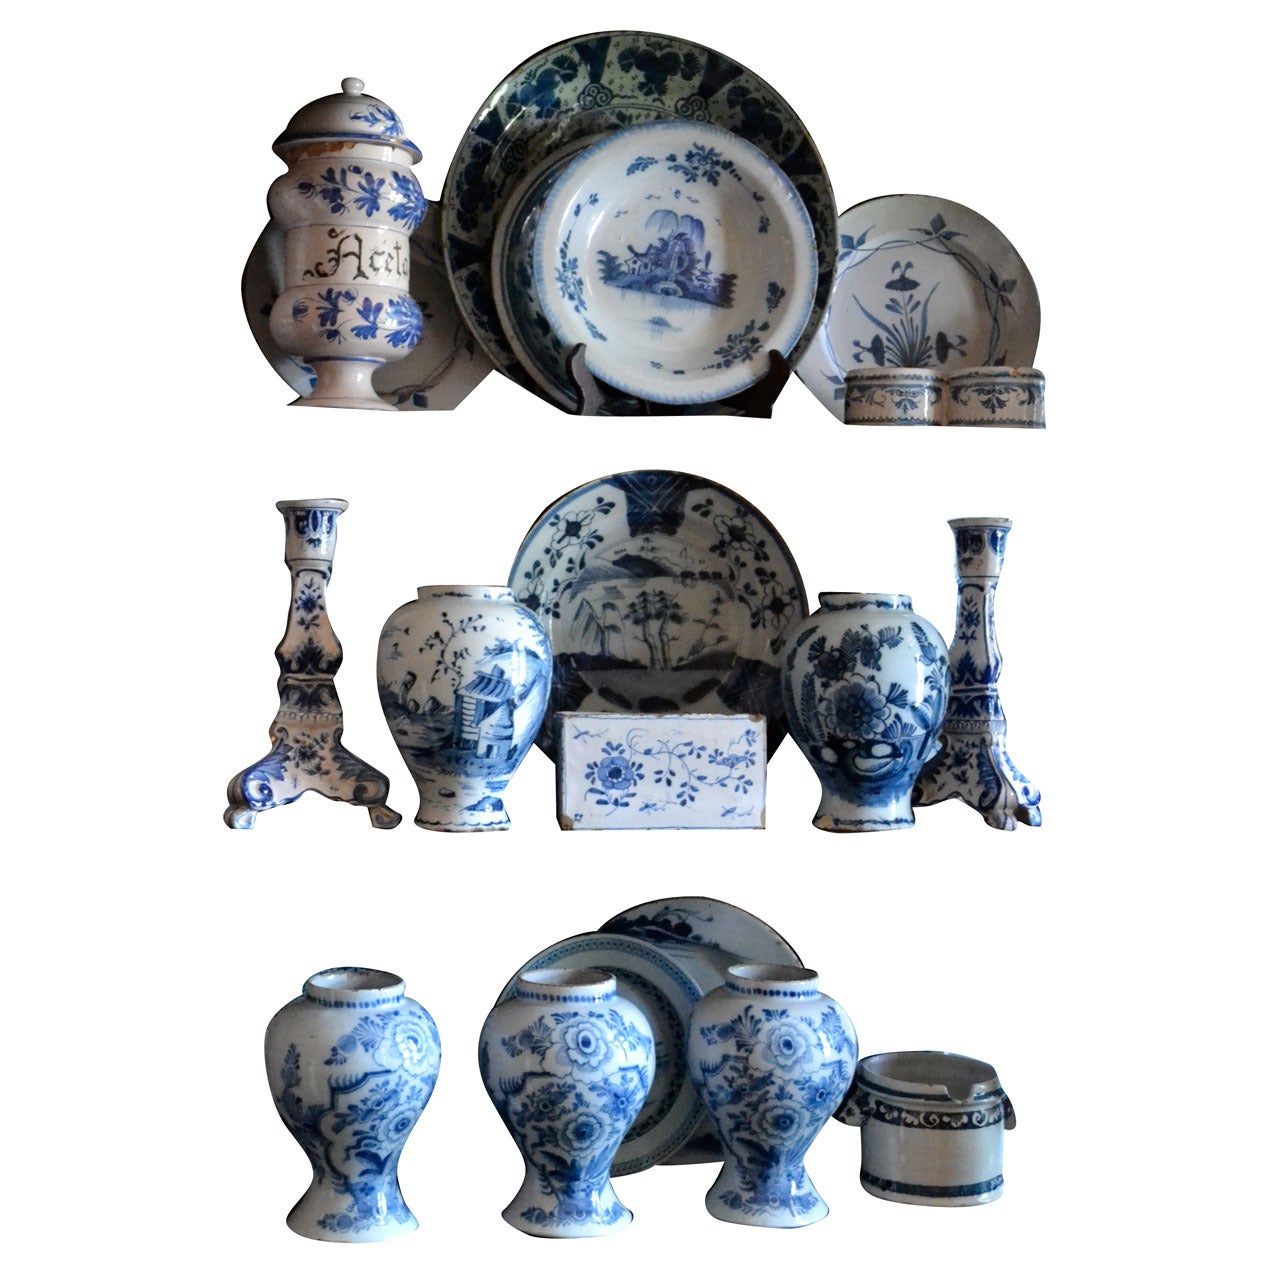 Large Wonderful Early Collection of 18th Century Delft Pottery For Sale